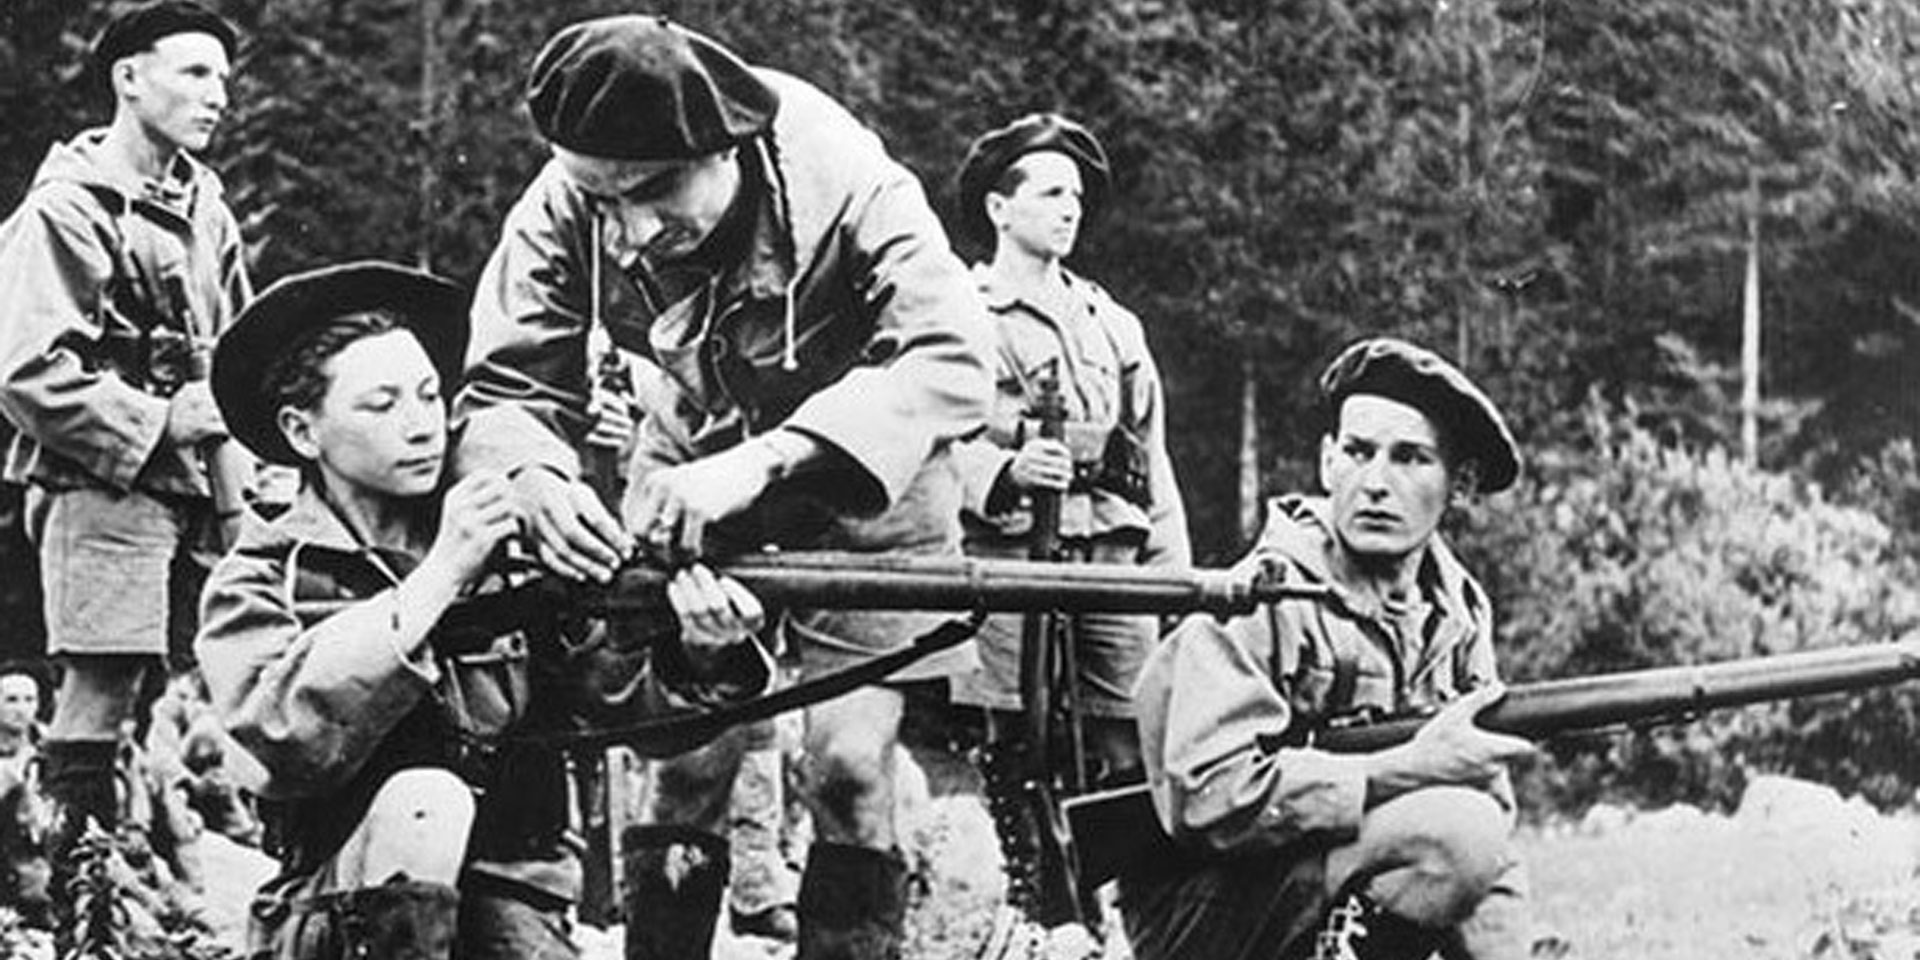 French Resistance fighters train with #4 Mk 1 Enfields